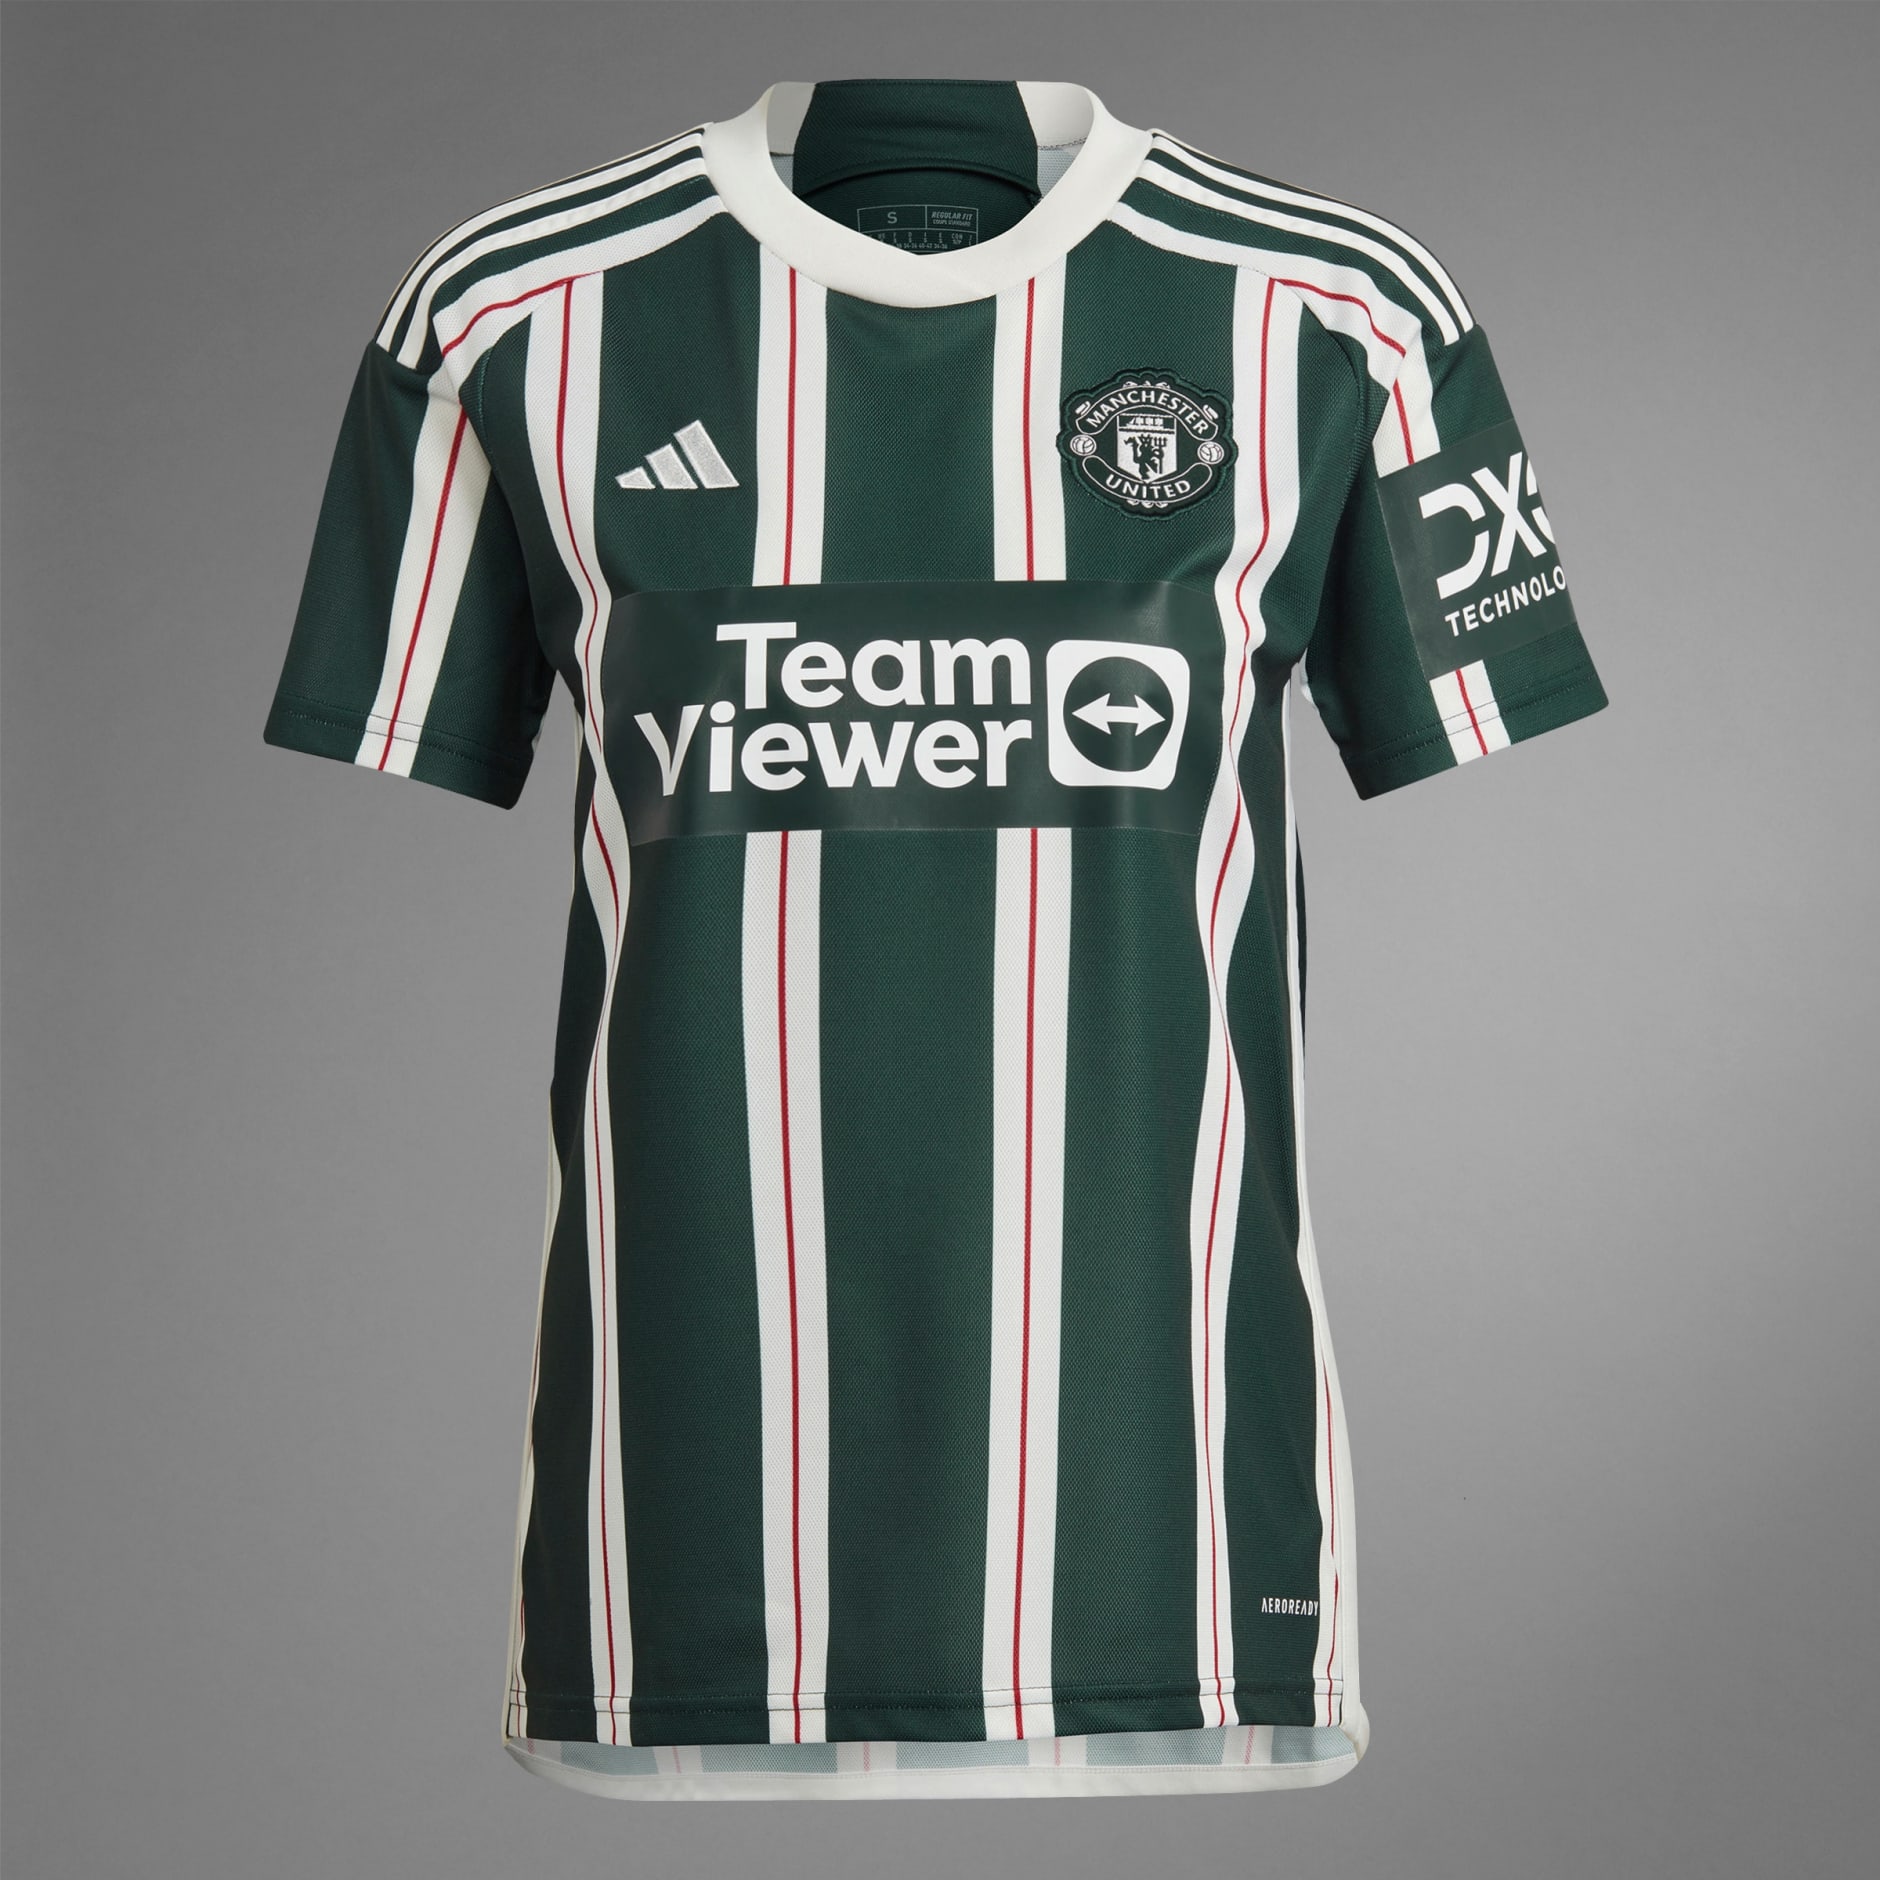 Men's Clothing - Manchester United 23/24 Away Jersey - Green